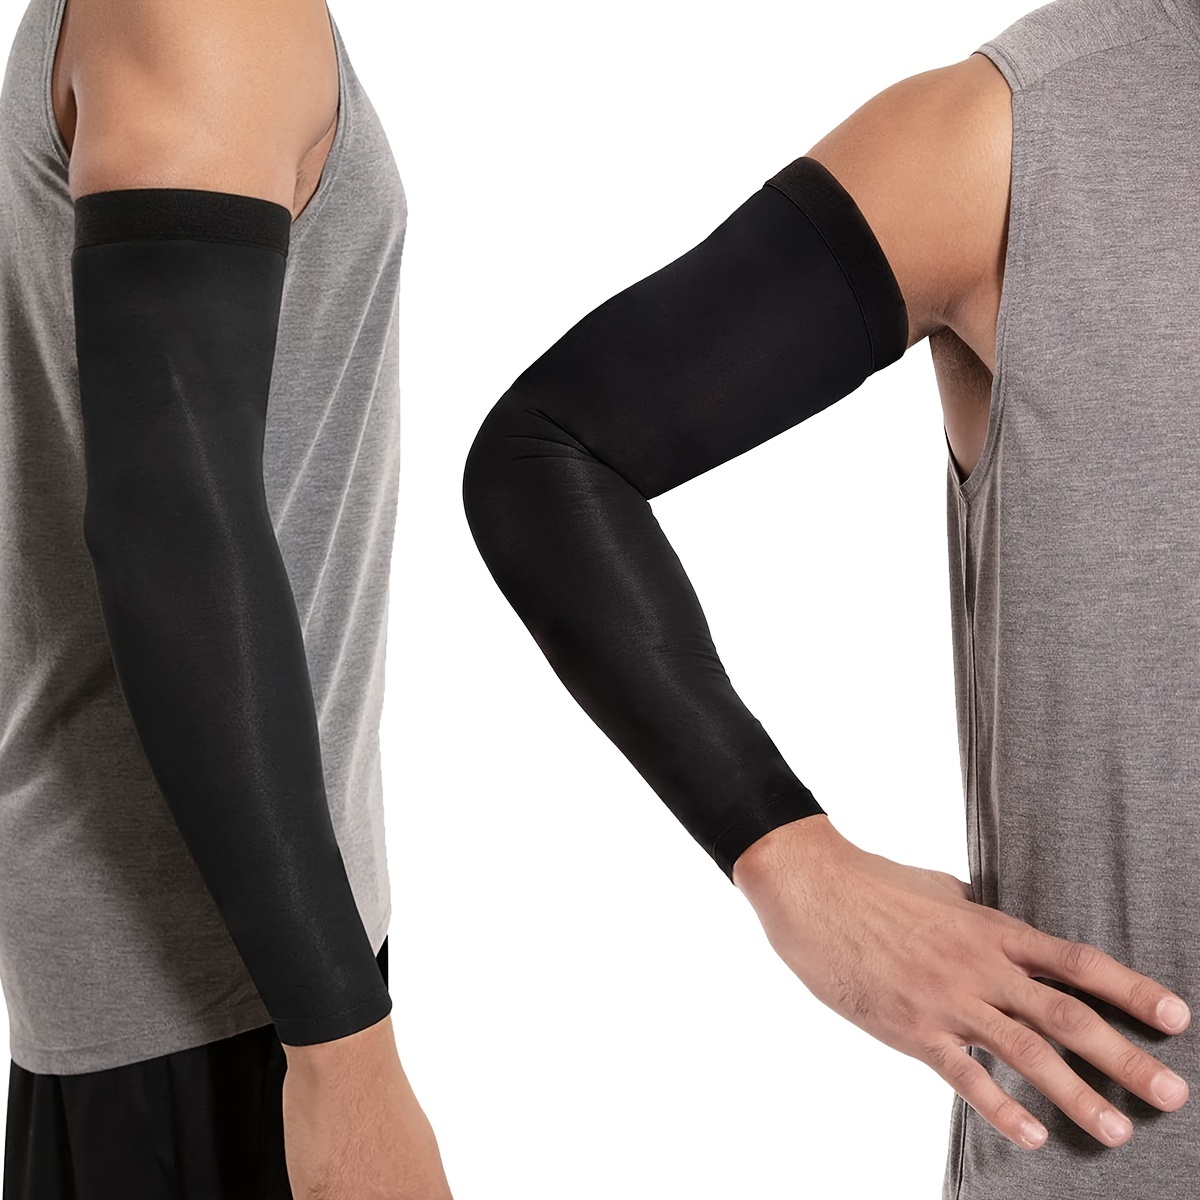 Athletic Compression Arm Sleeves - Shooting Sleeves For Men And Women -  Basketball, Football, Baseball.